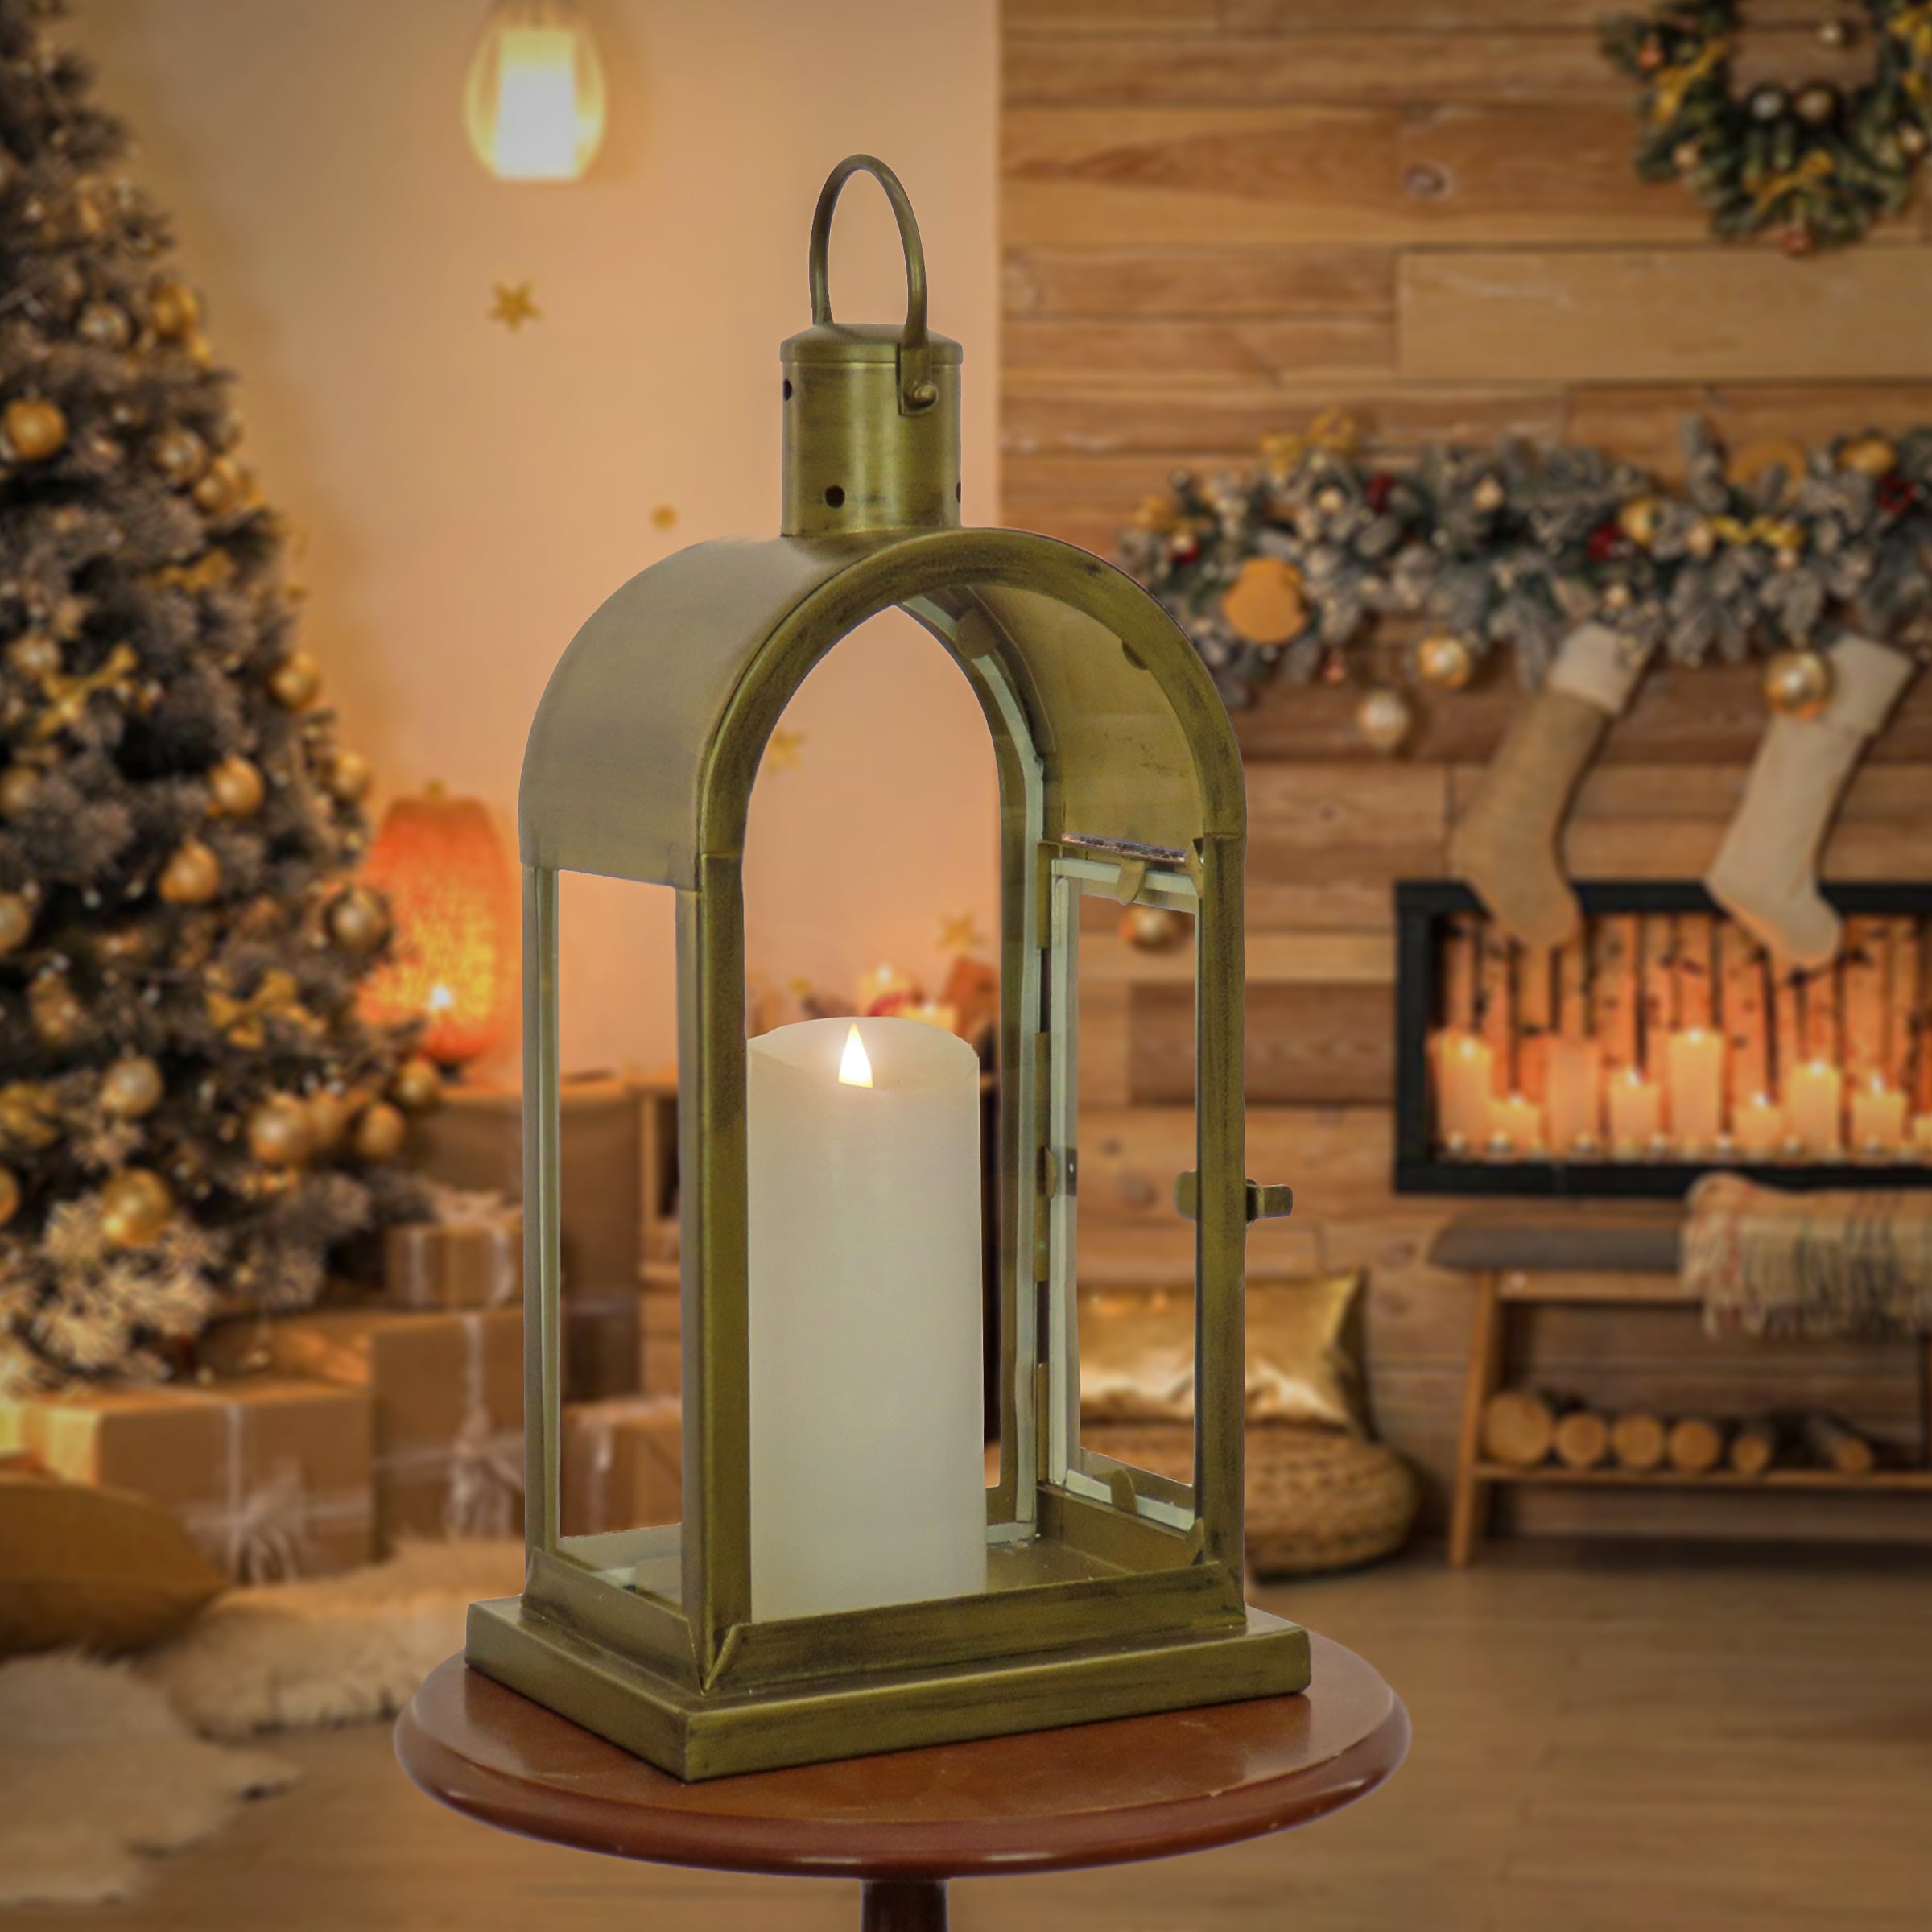 https://ak1.ostkcdn.com/images/products/is/images/direct/b5ca946eec08ce2ebb4dd45f7112d789a6f796c5/HGTV-Home-Collection-Arched-Candle-Lantern%2C-Christmas-Themed-Home-Decor%2C-Small%2C-Antique-Bronze%2C-16-in.jpg